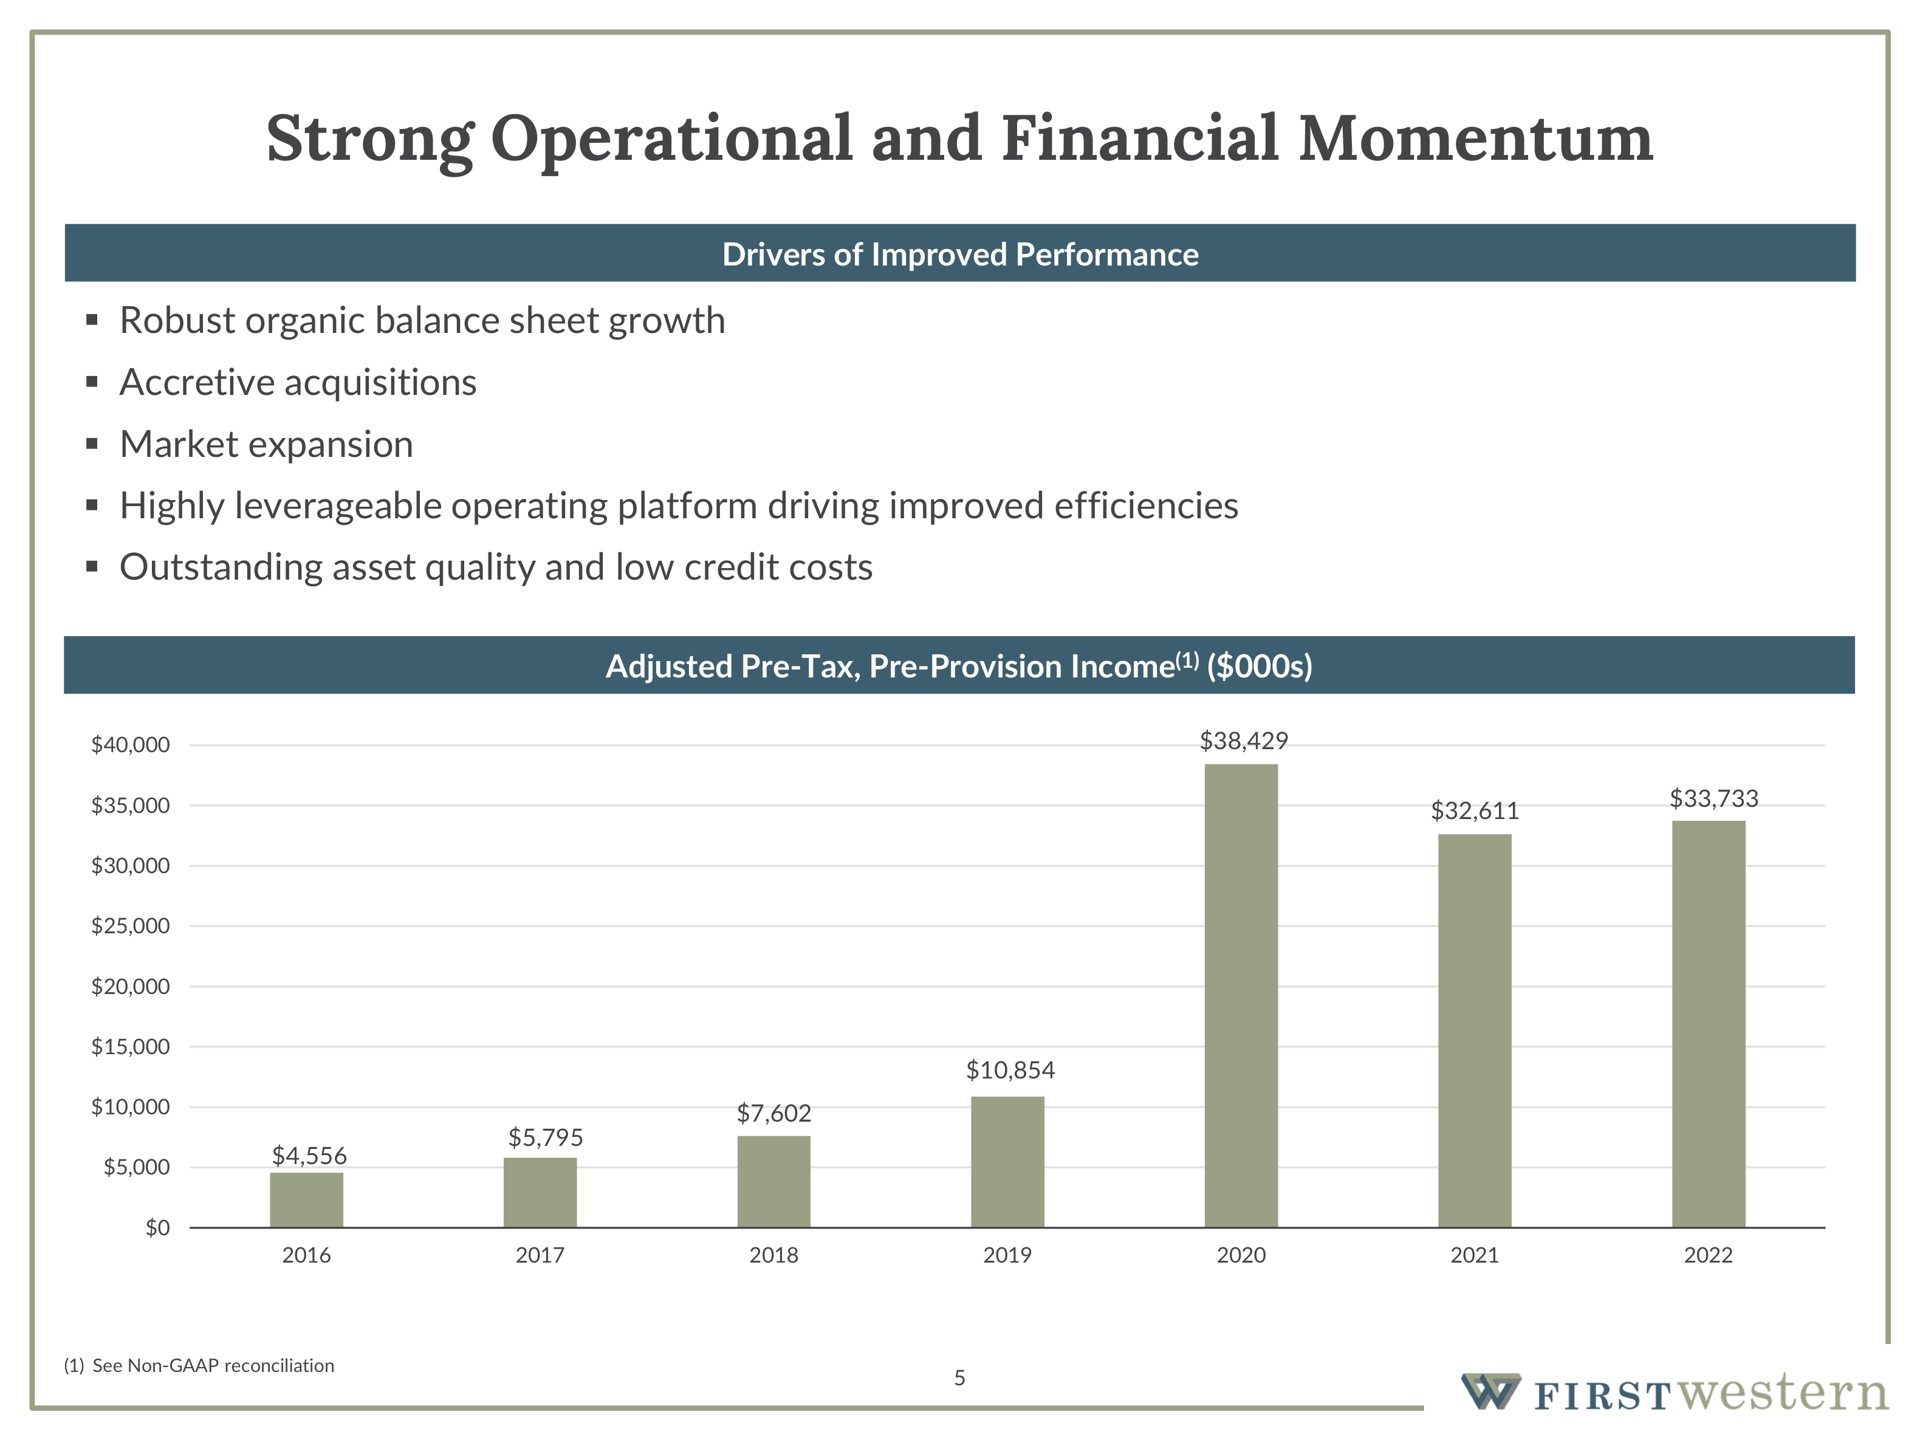 strong operational and financial momentum | First Western Financial